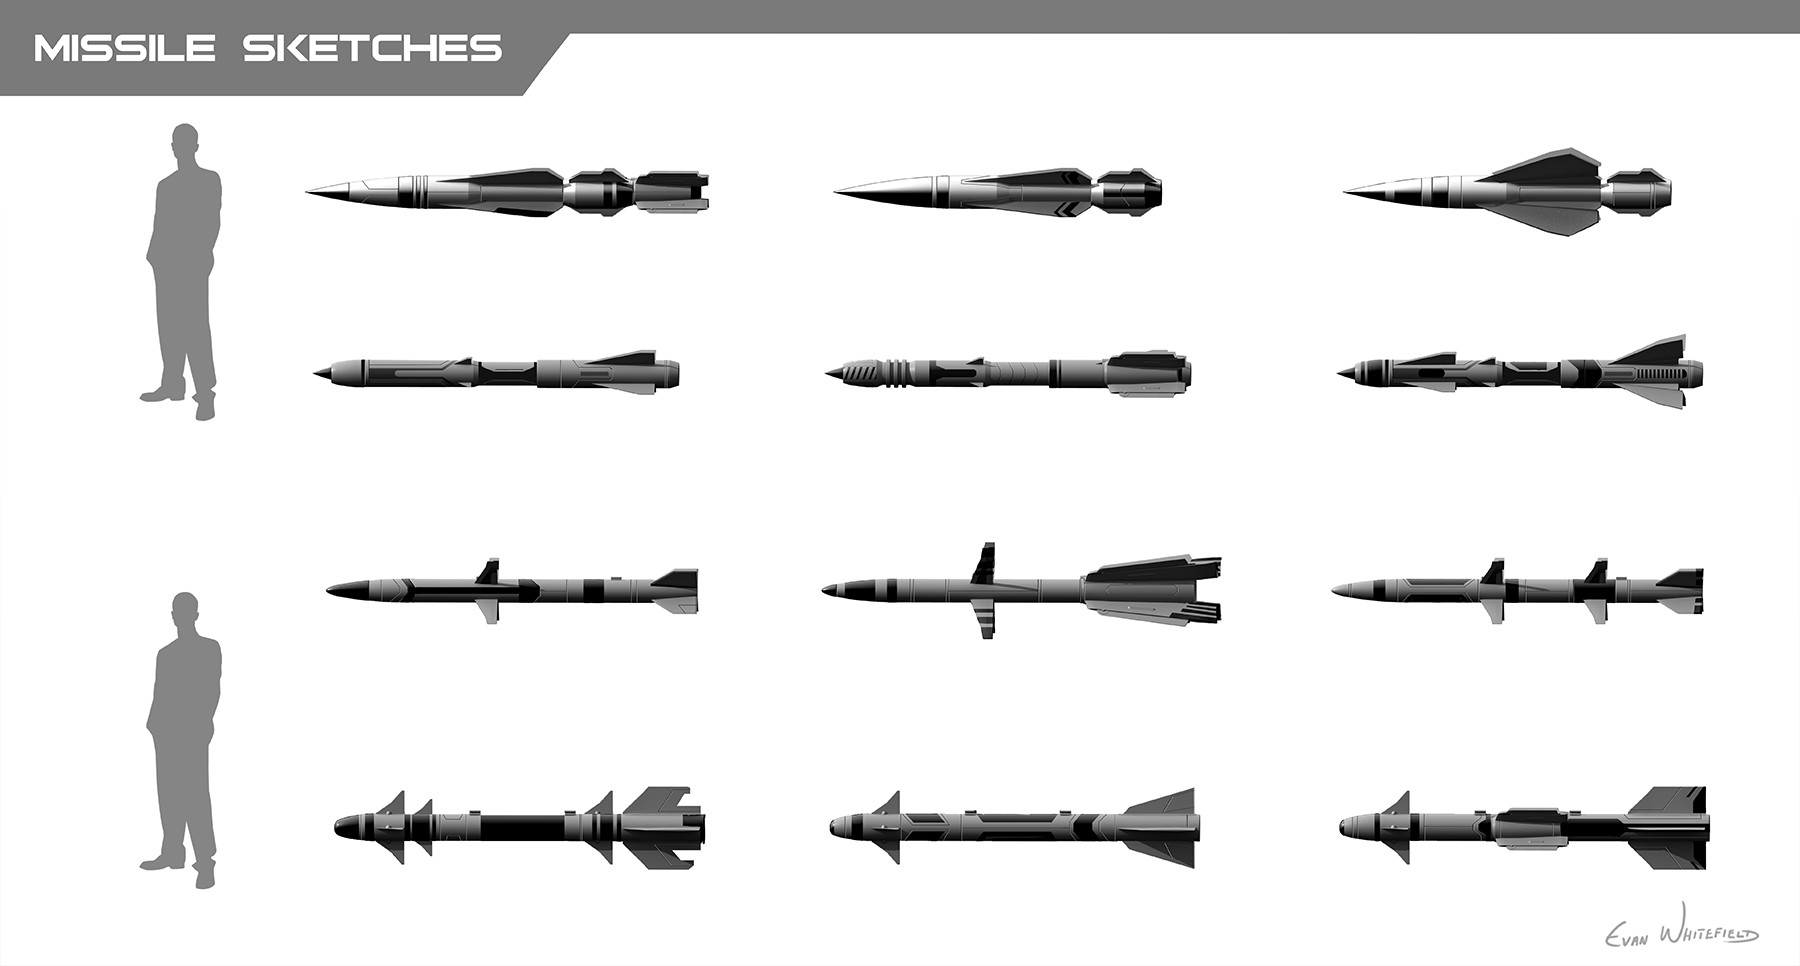 2453 Missile Sketch Images Stock Photos  Vectors  Shutterstock